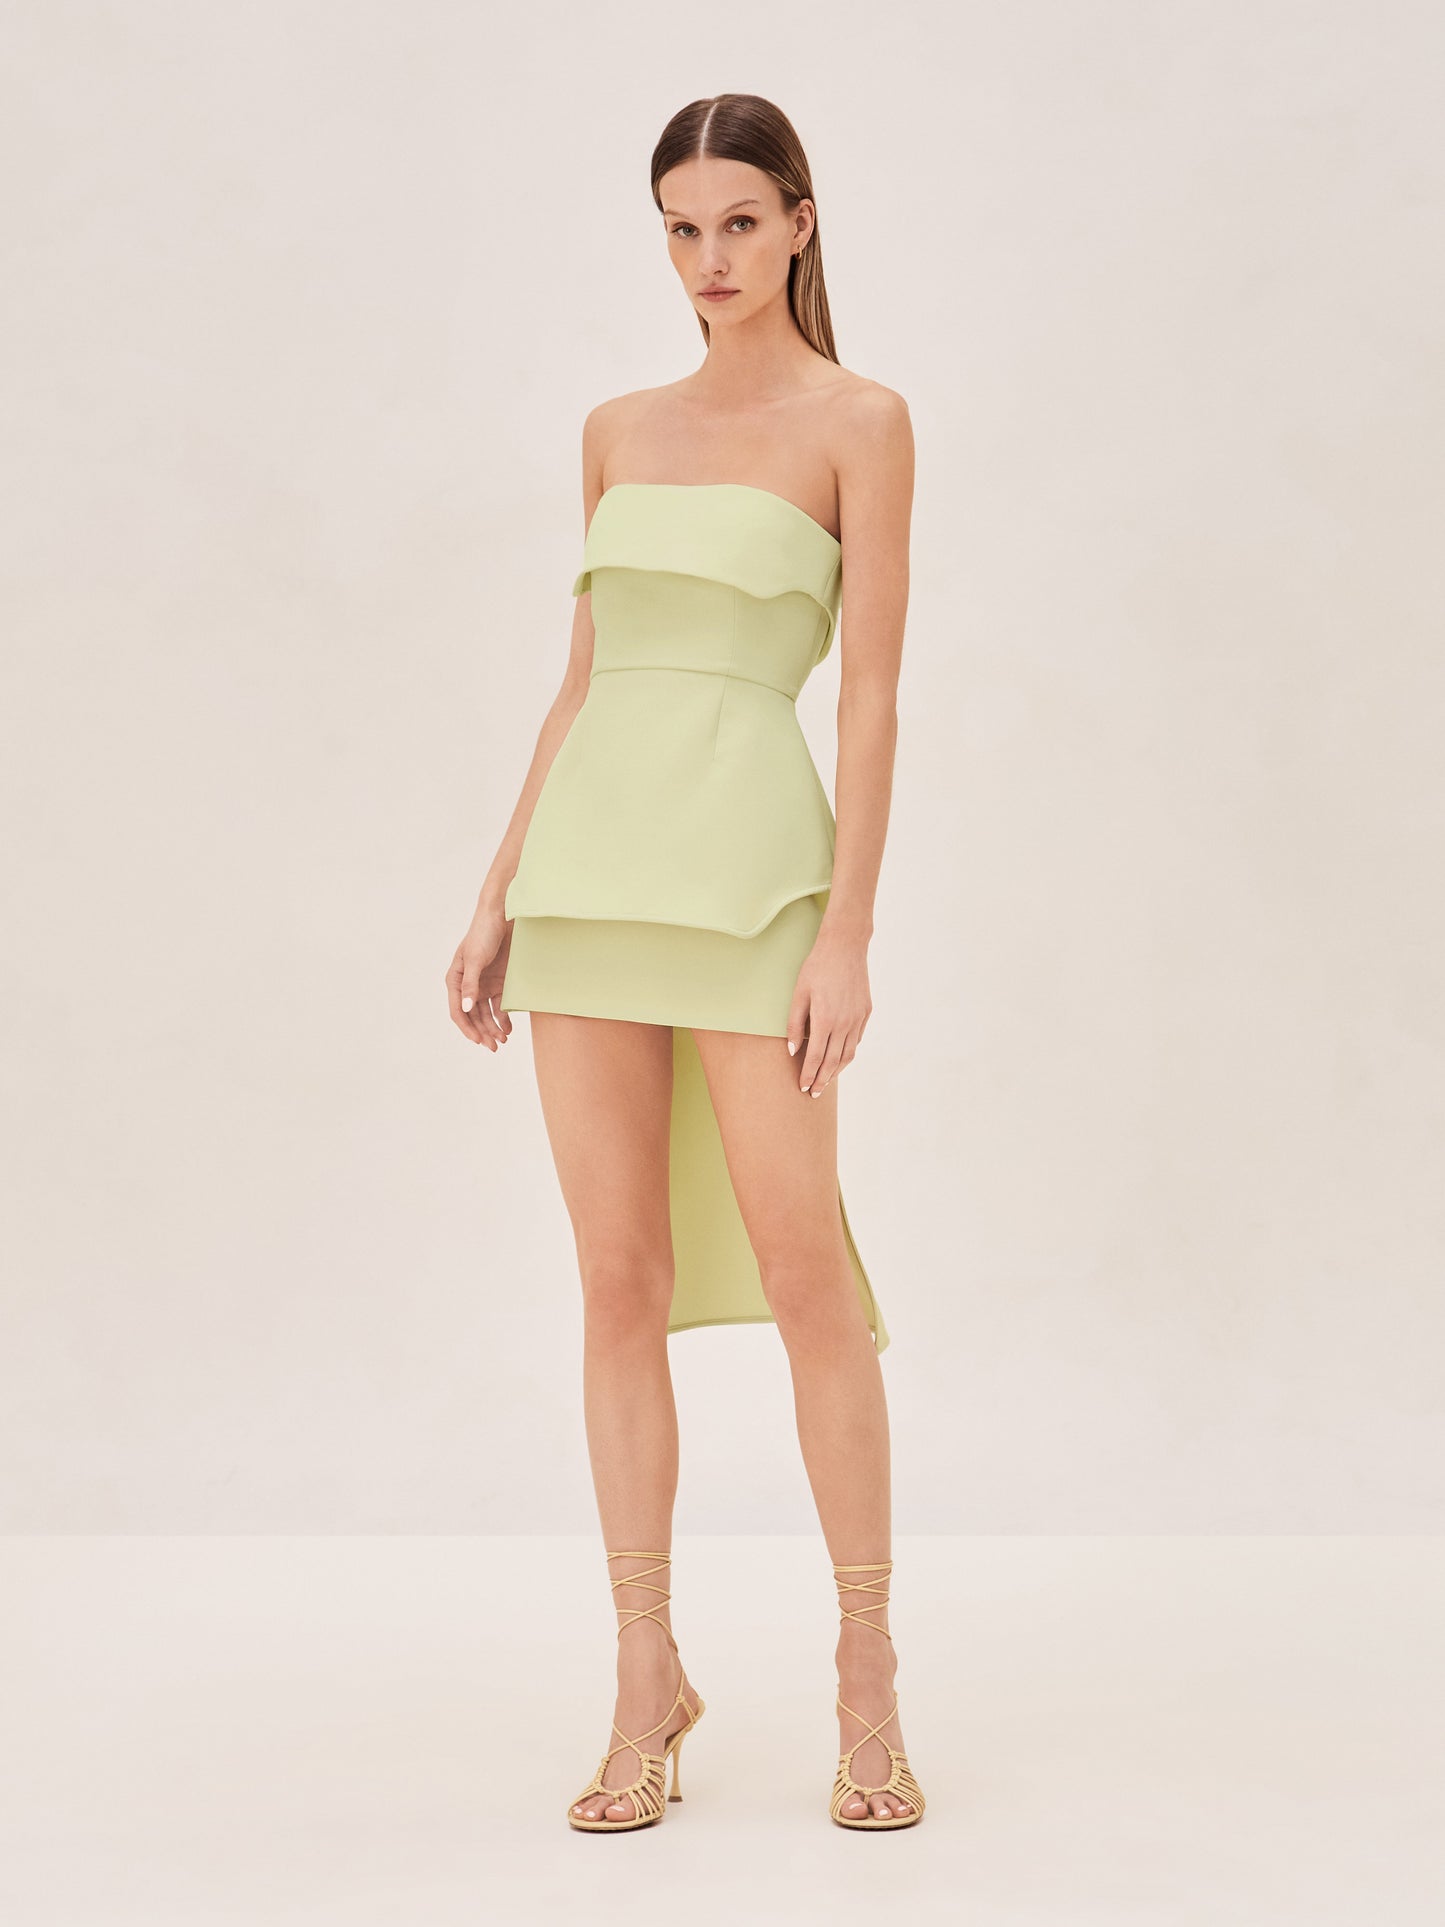 ALEXIS strapless hi-lo limelight green top